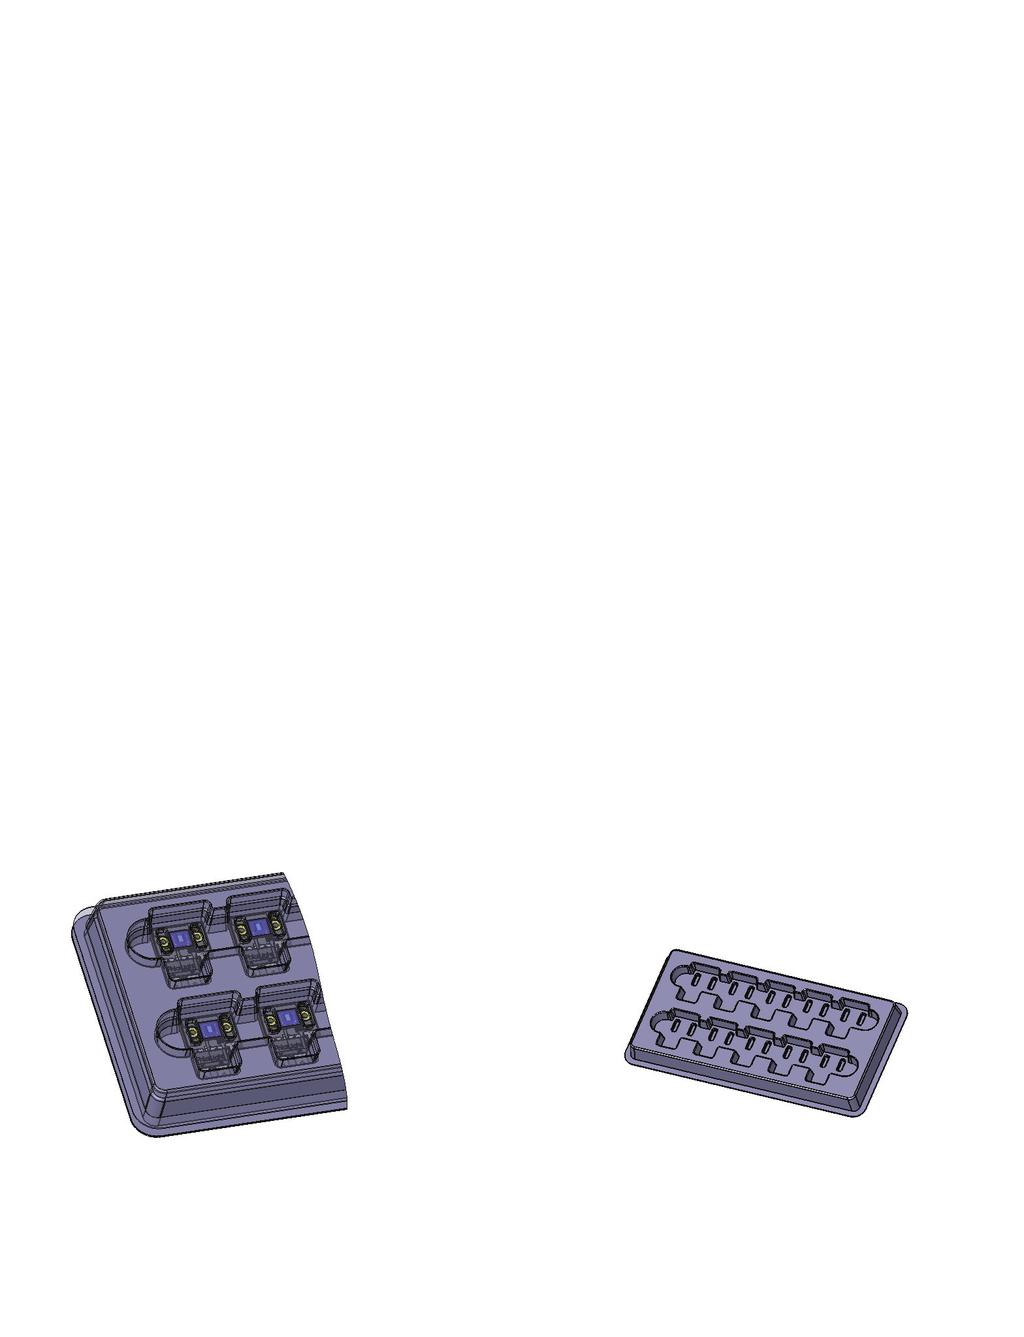 Shipping Tray Outline - CBT-2-C3 DIMENSIONS IN MILLIMETERS 266.7 254 6.35 23.7 39.